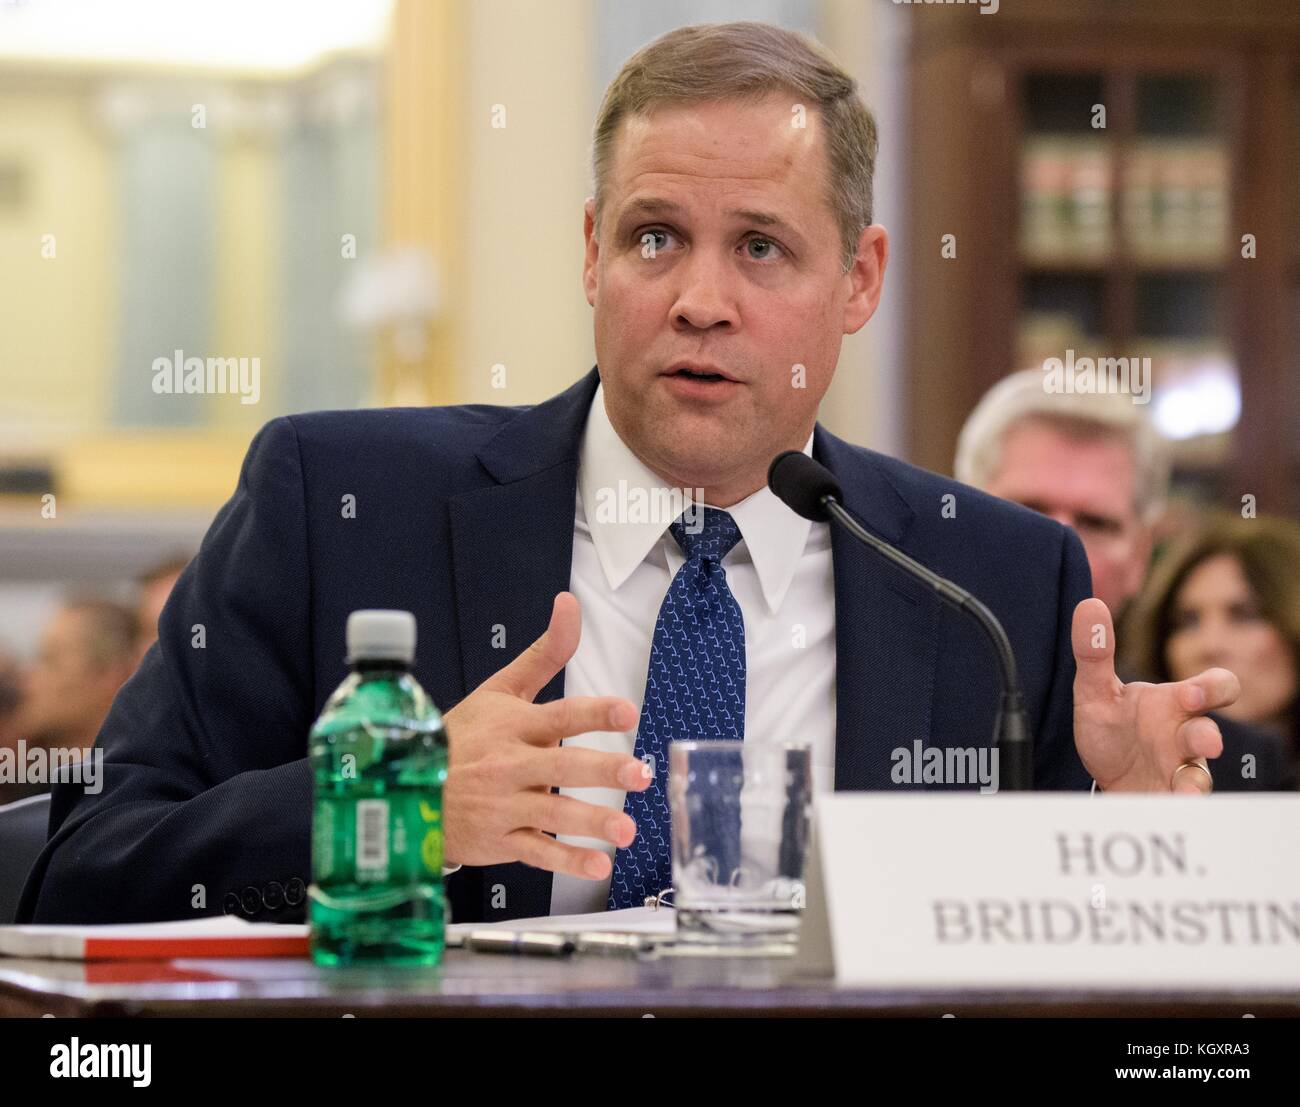 U.S. Oklahoma Representative James Bridenstine testifies before the Senate Committee on Commerce, Science, and Transportation during his nomination hearing for NASA Administrator at the Russell Senate Office Building November 1, 2017 in Washington, DC.   (photo by Joel Kowsky via Planetpix) Stock Photo